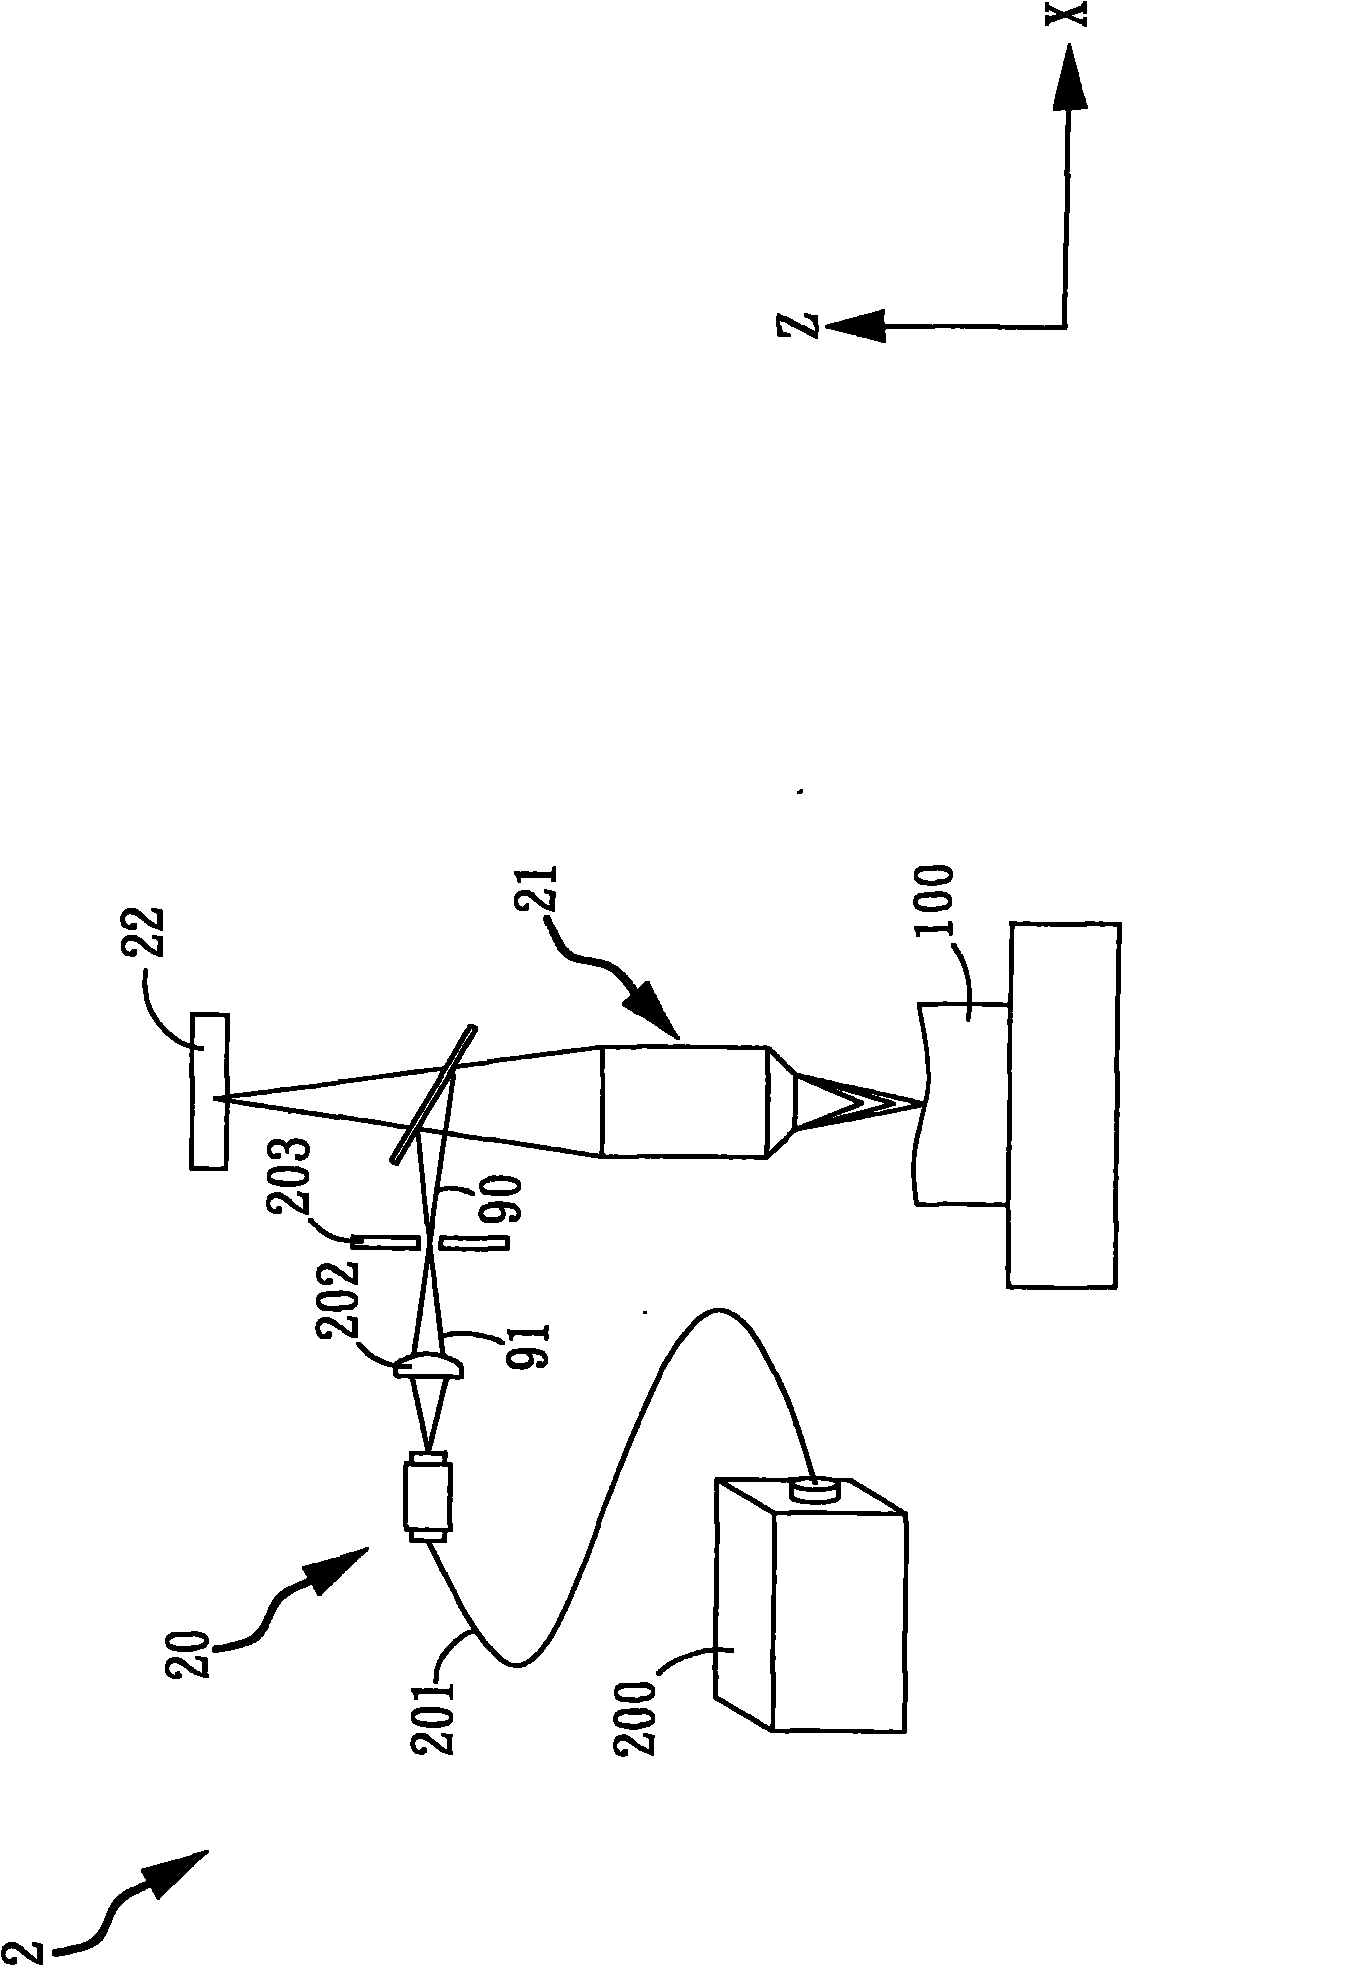 Linear multi-wavelength confocal microscope module and confocal microscopic method and system thereof